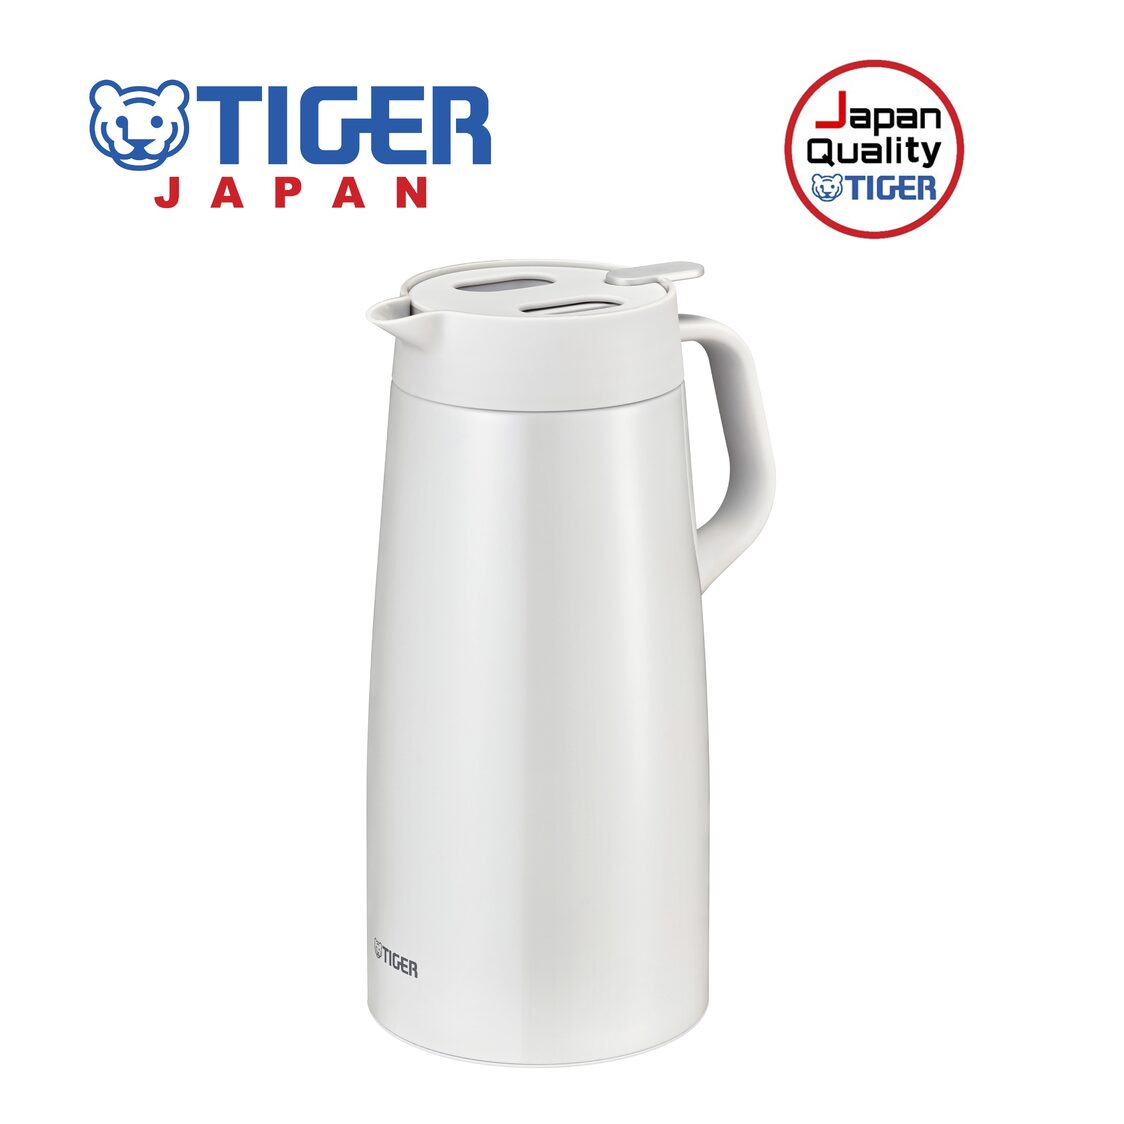 Tiger 20L Double Stainless Steel Handy Jug  White PWO-A200 W